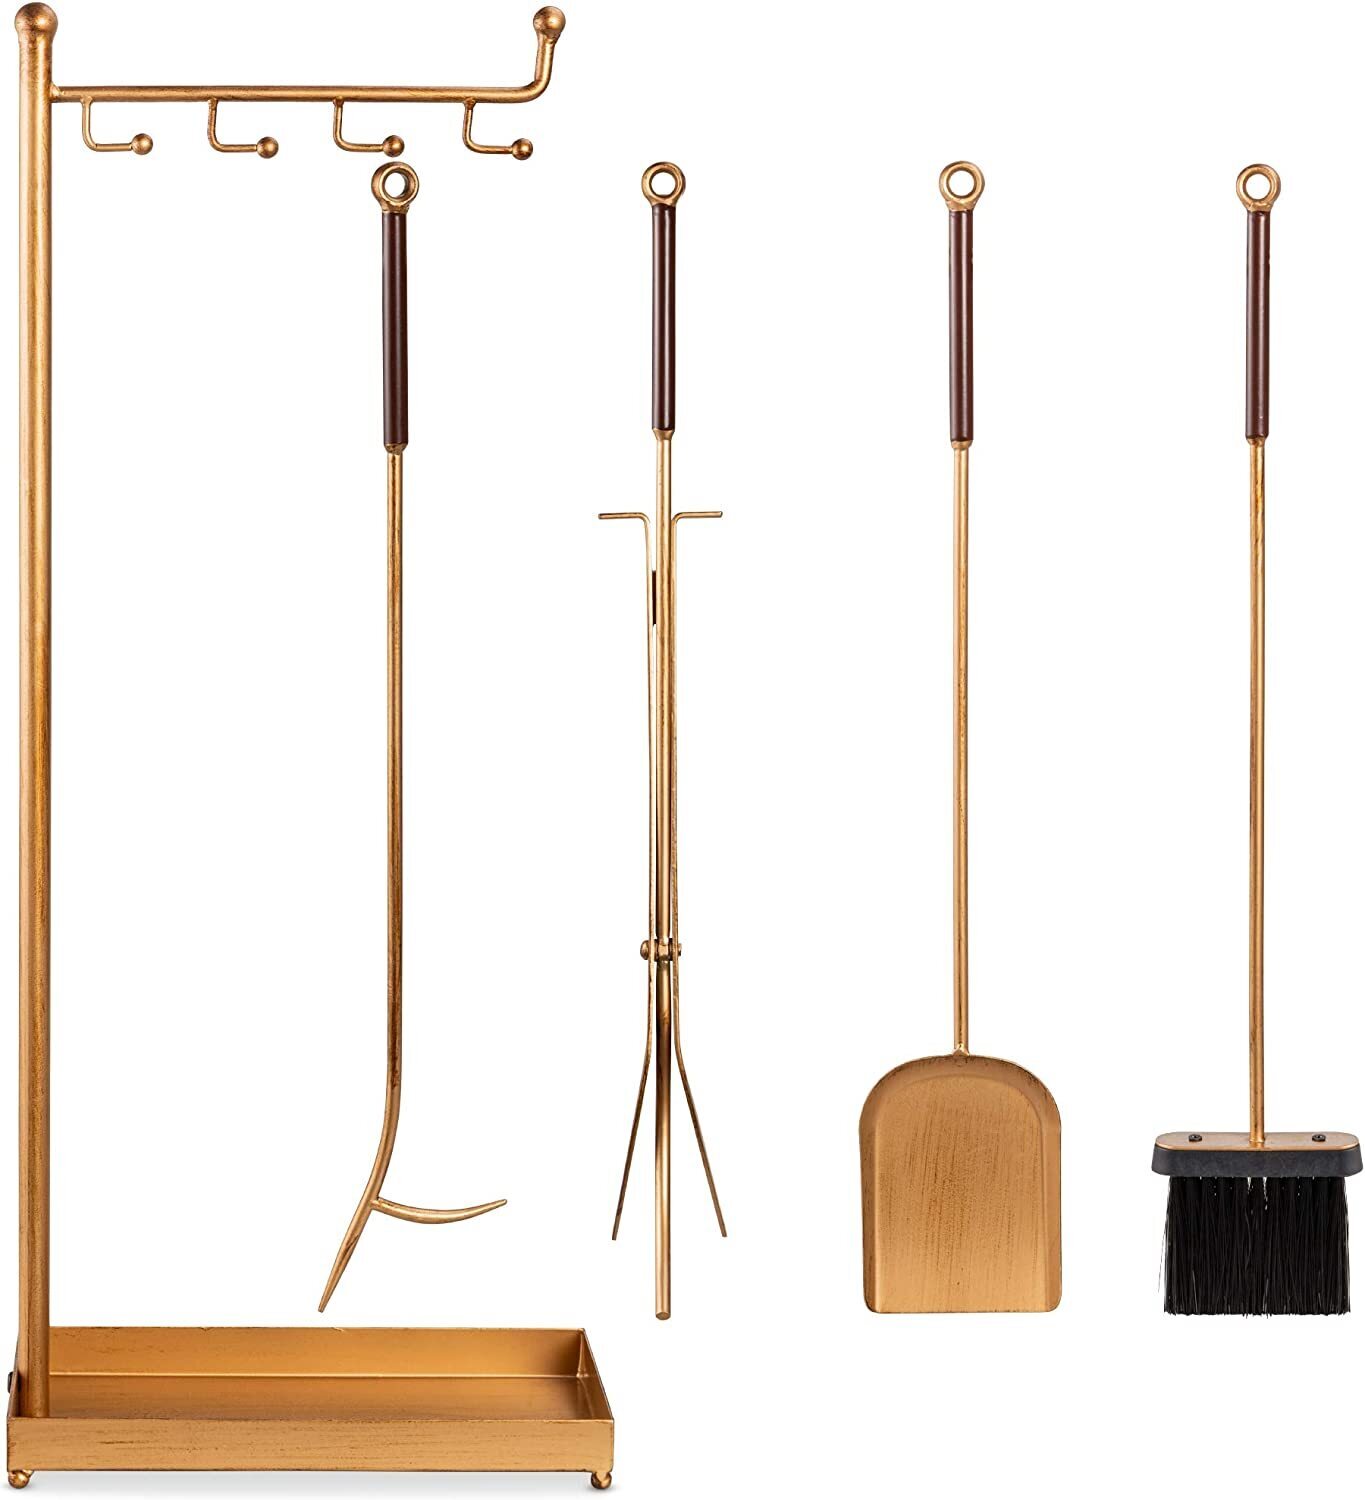 Unusual Contemporary Fireplace Toolset